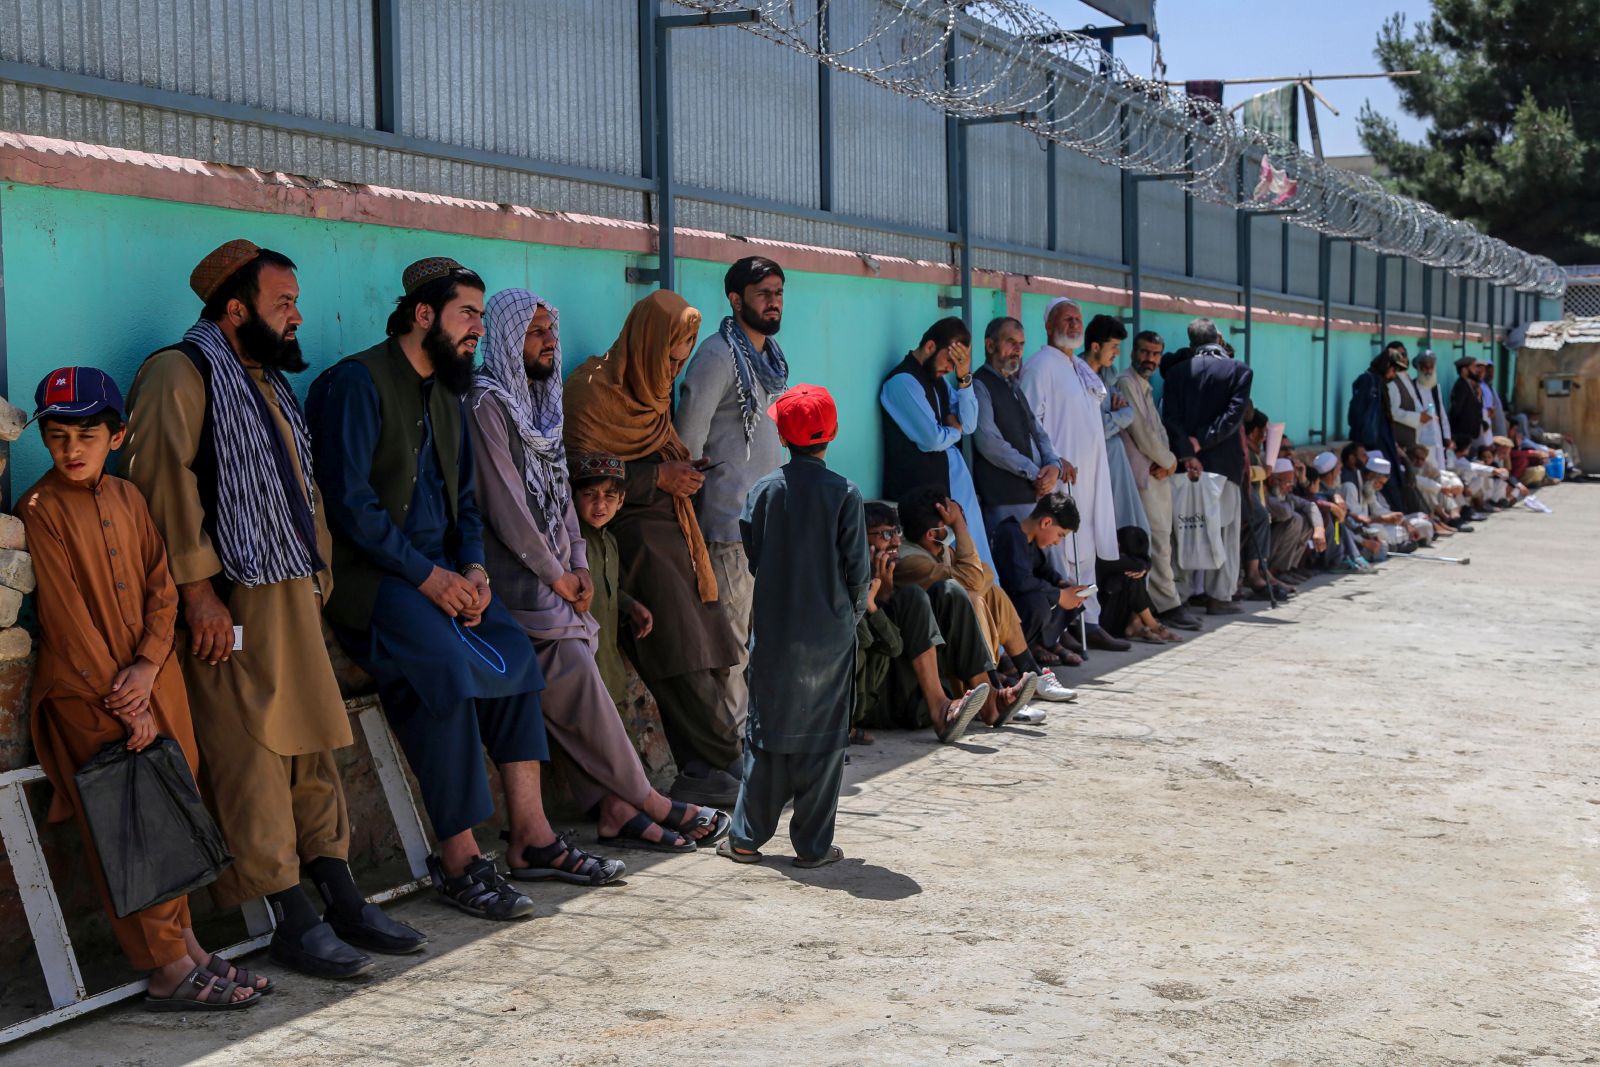 epa10688731 People line up to get free eye treatment in Kabul, Afghanistan, 13 June 2023. Pakistani doctors have started providing free eye treatments and surgeries for 800,000 patients suffering from eye diseases in Kabul and Kandahar. The initiative is carried out in cooperation with the Afghan Red Crescent, the King Salman Charity Foundation, and the Basar Charity Foundation. Specialist doctors from Karachi, Pakistan, are performing the operations using new technology and equipments. The initiative has been welcomed by patients, who are requesting that it be extended to other provinces. Afghanistan is known to have a high incidence of eye diseases due to environmental problems, and health officials are urging residents to take care of their eye health.  EPA/SAMIULLAH POPAL